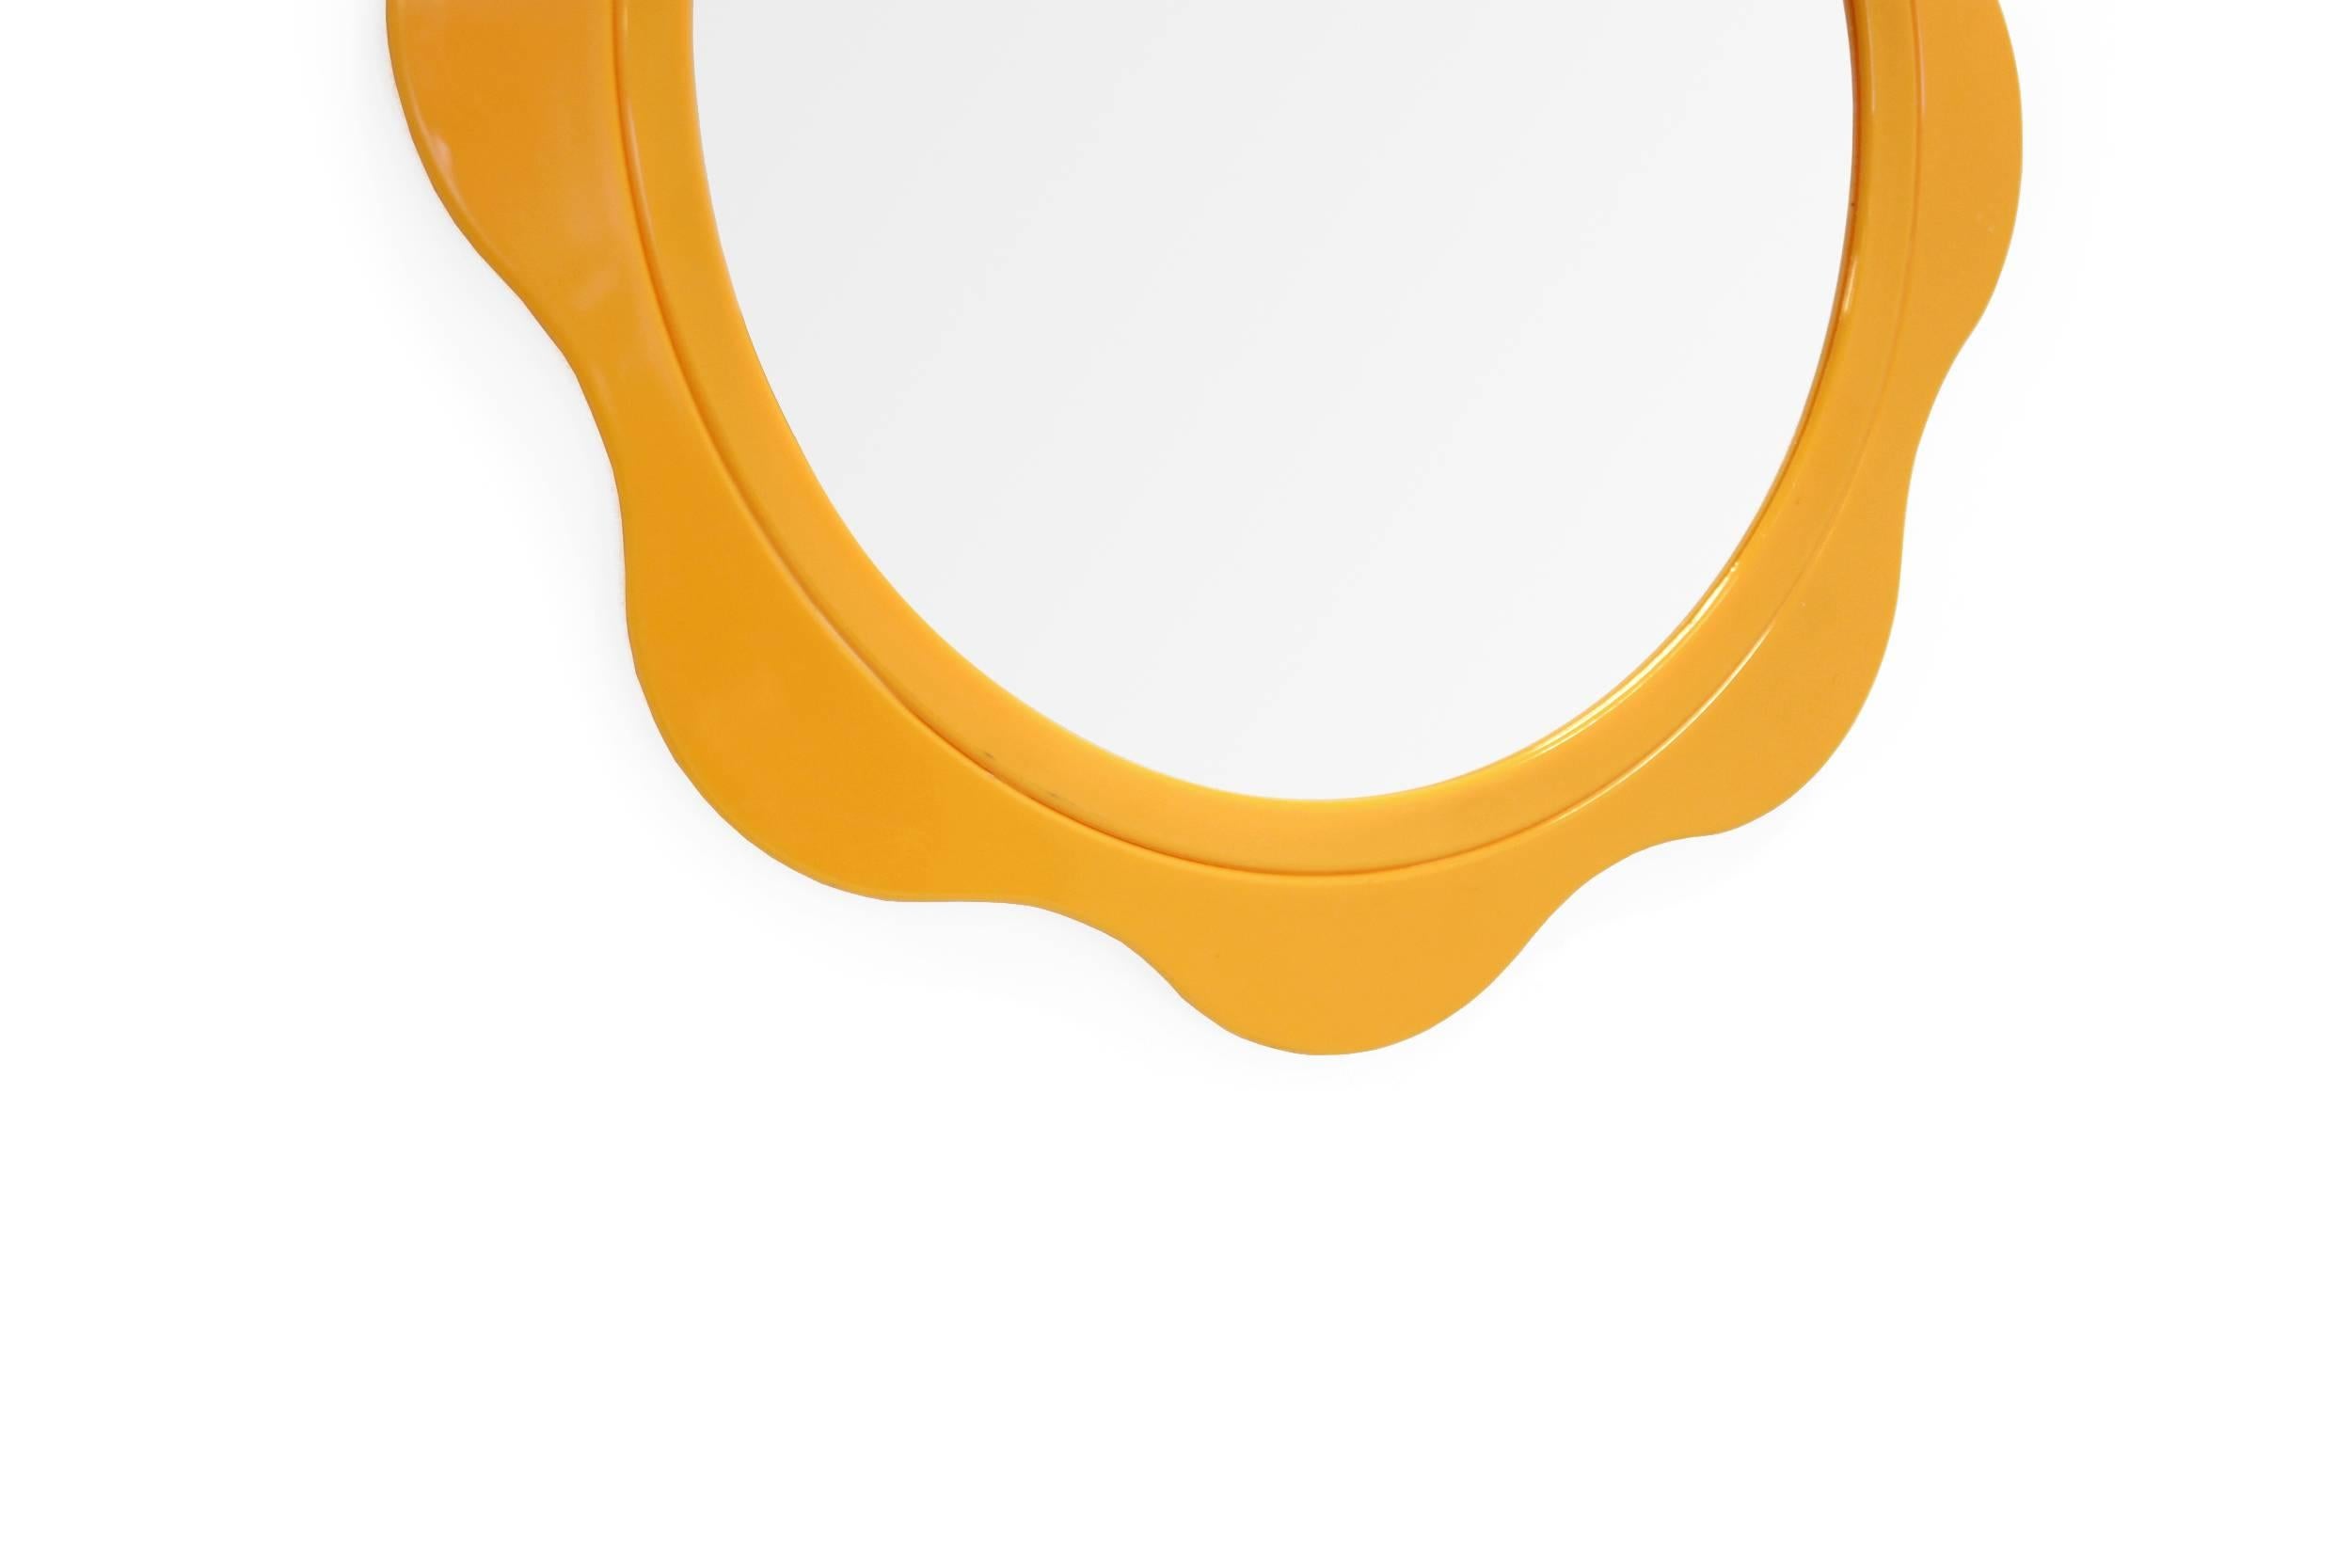 Exuberant circular finnish pop art mirror on a plastic frame. Designed and manufactured by Makisen Kuvastin Oy. In excellent vintage condition. Complimentary word wide shipping.